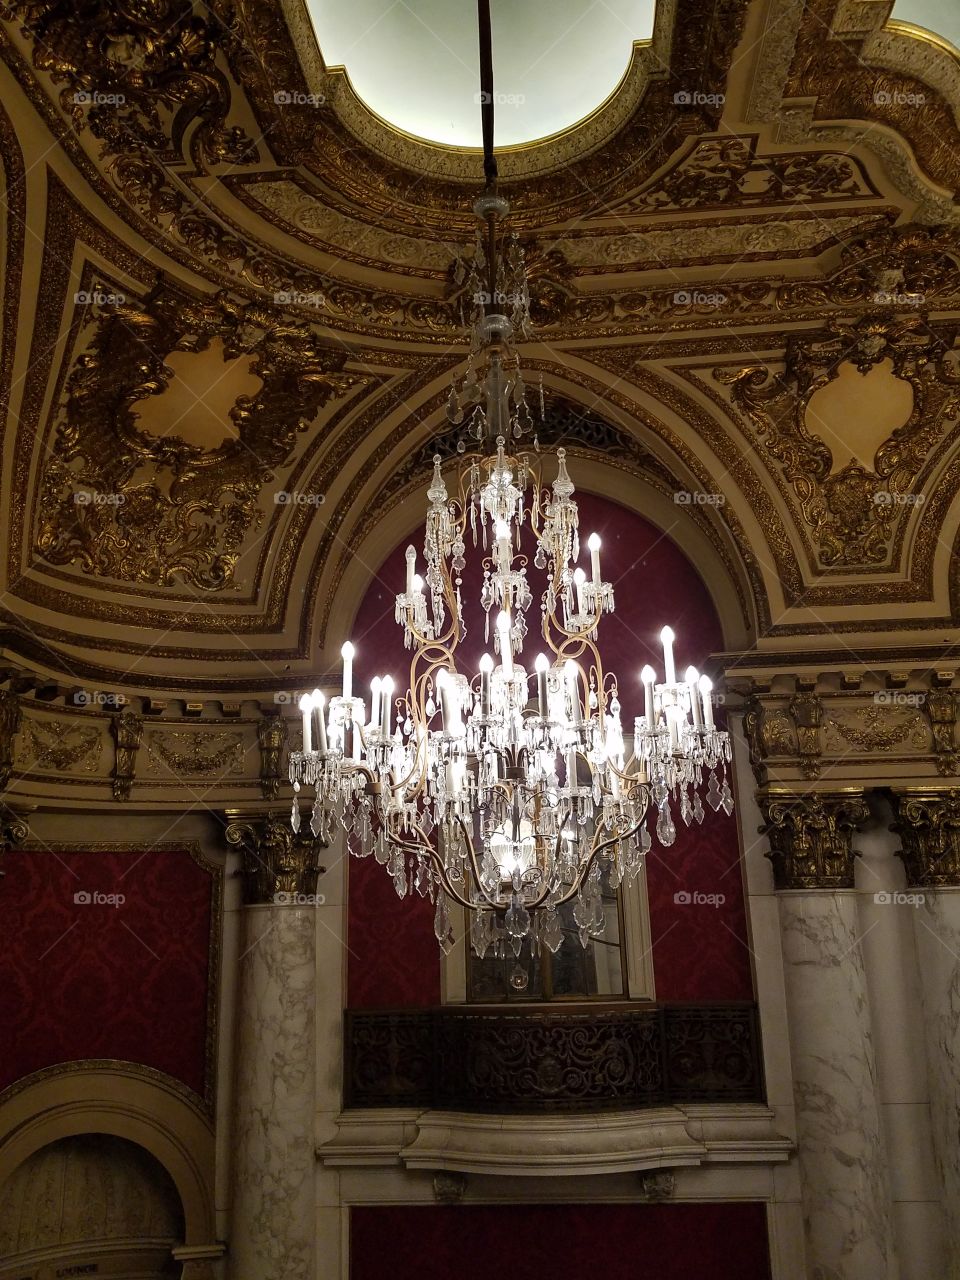 Opera House chandelier and gold ceiling